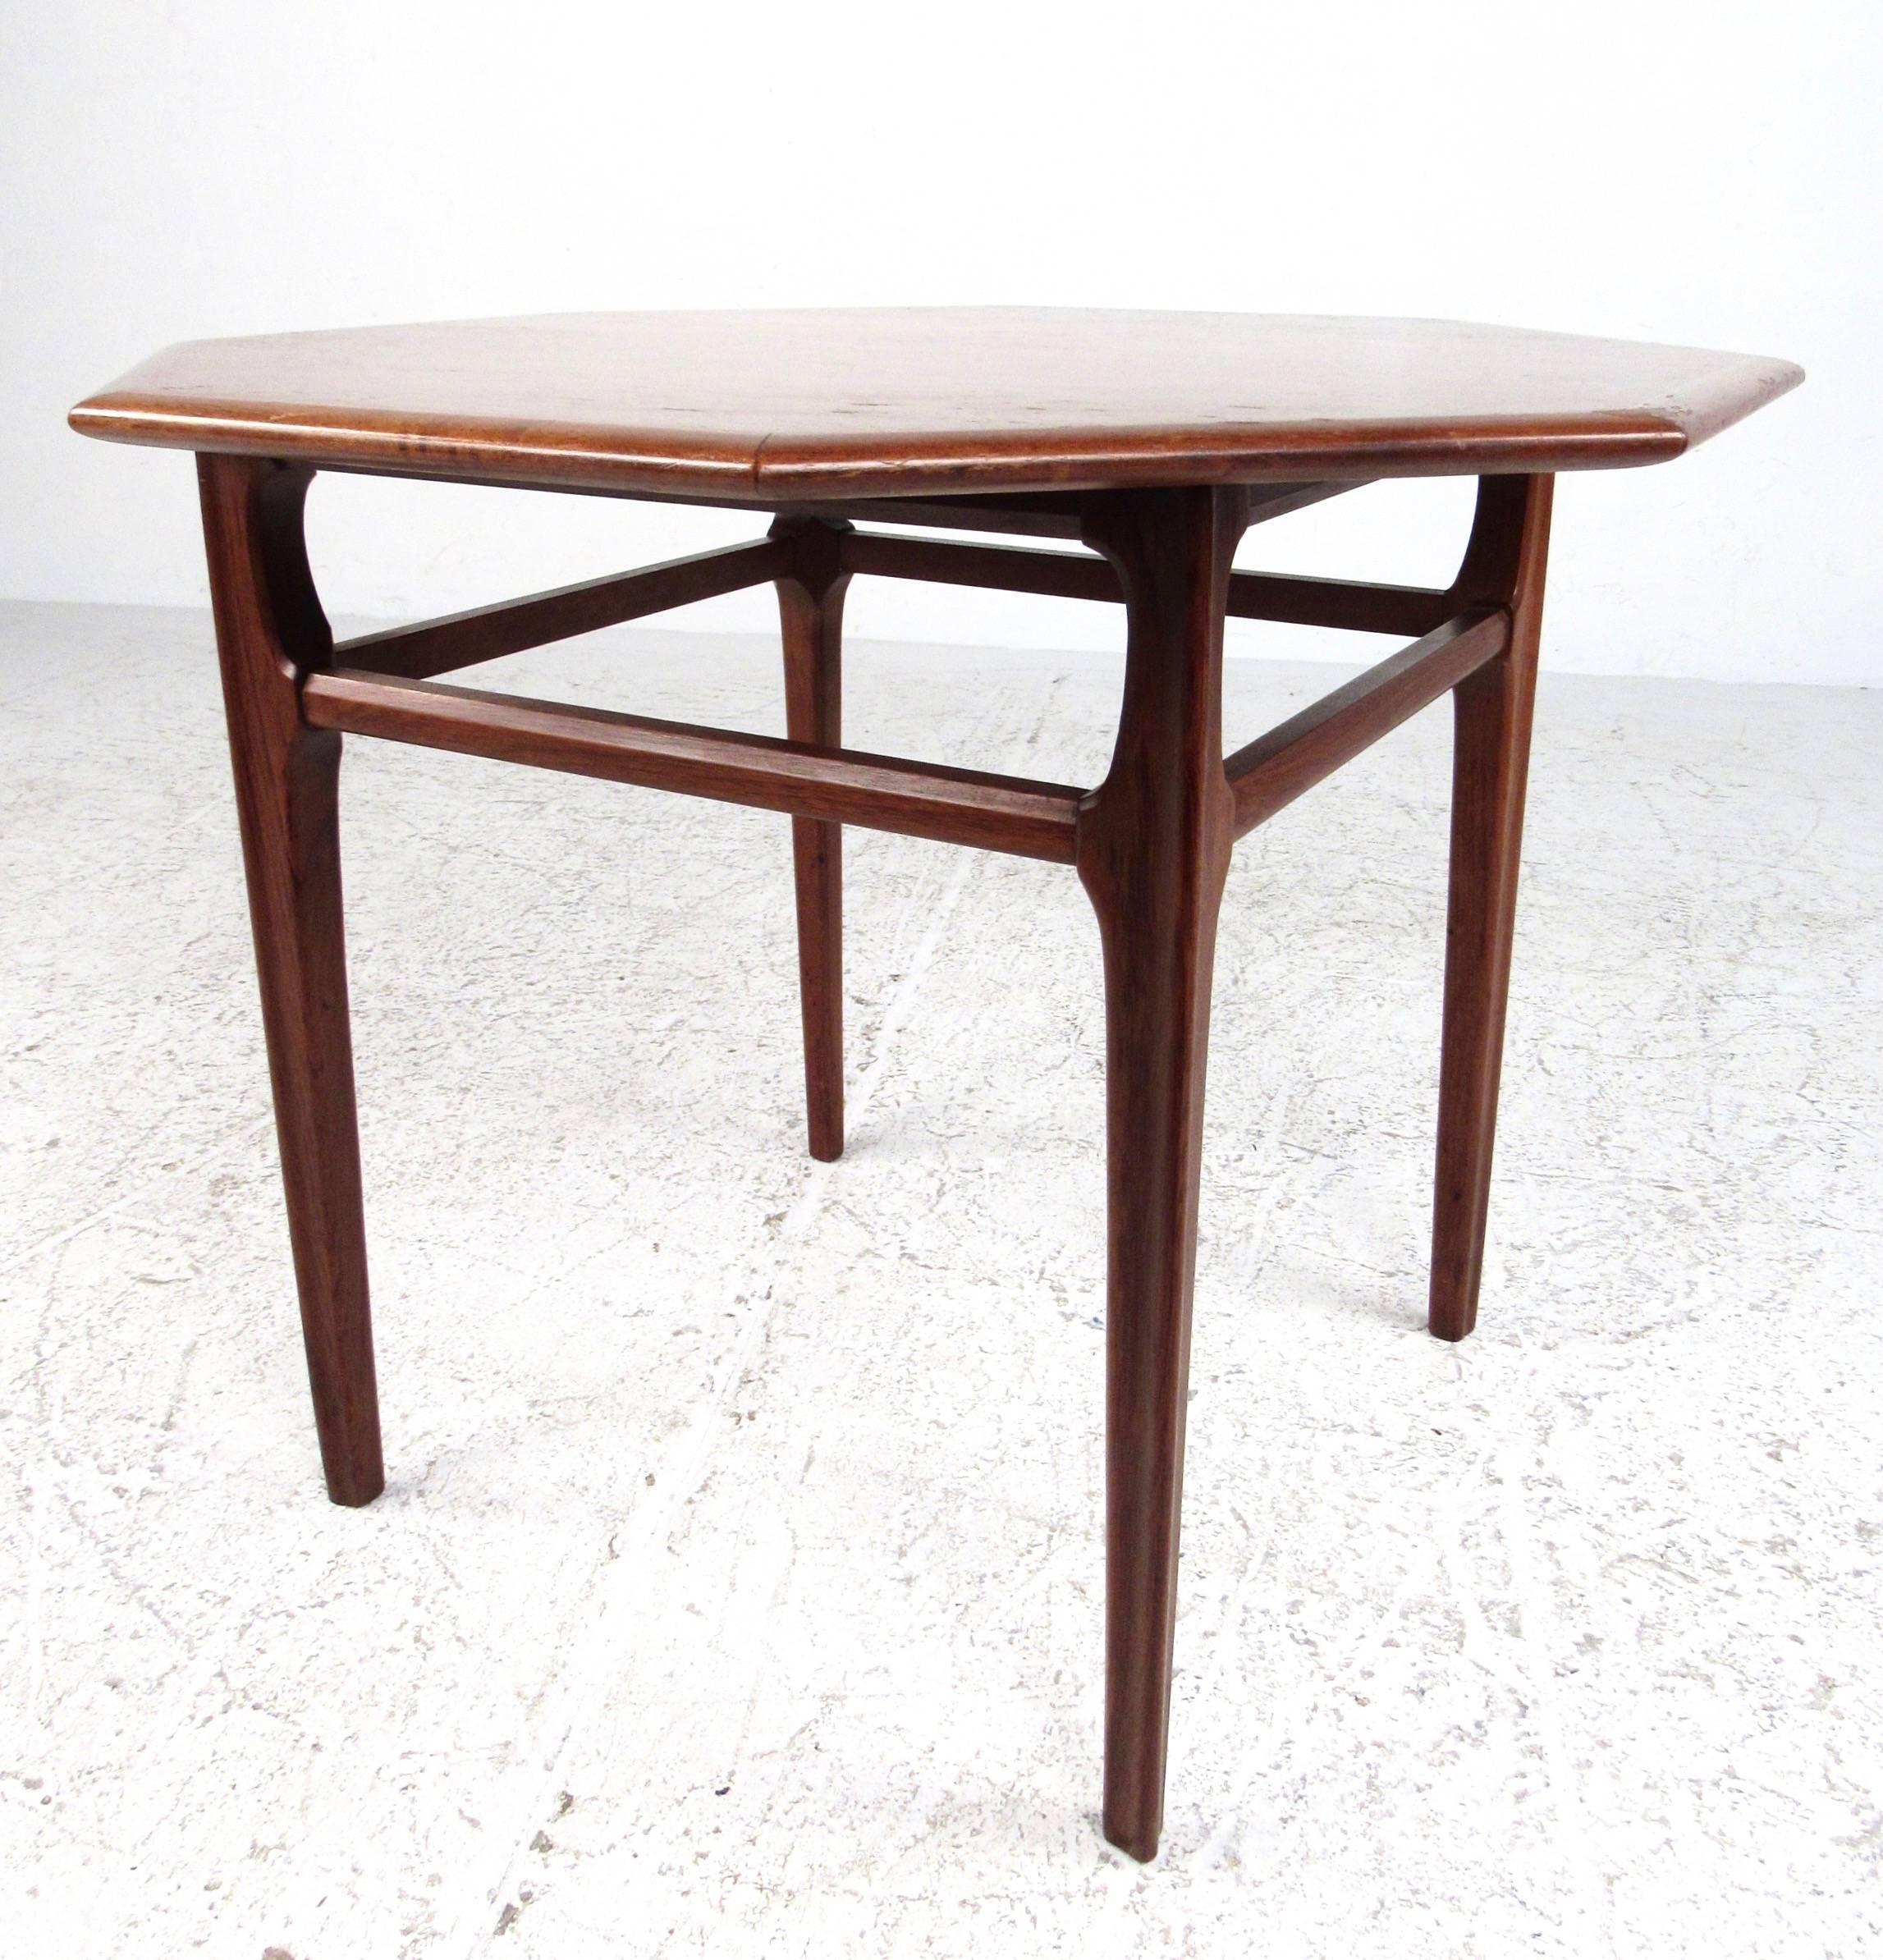 This vintage modern American walnut side table features a sculpted octagonal shape, gorgeous vintage wood finish, and tall slender legs. Four way stretchers add stability to this perfect sofa end table. Great occasional table for home or office.